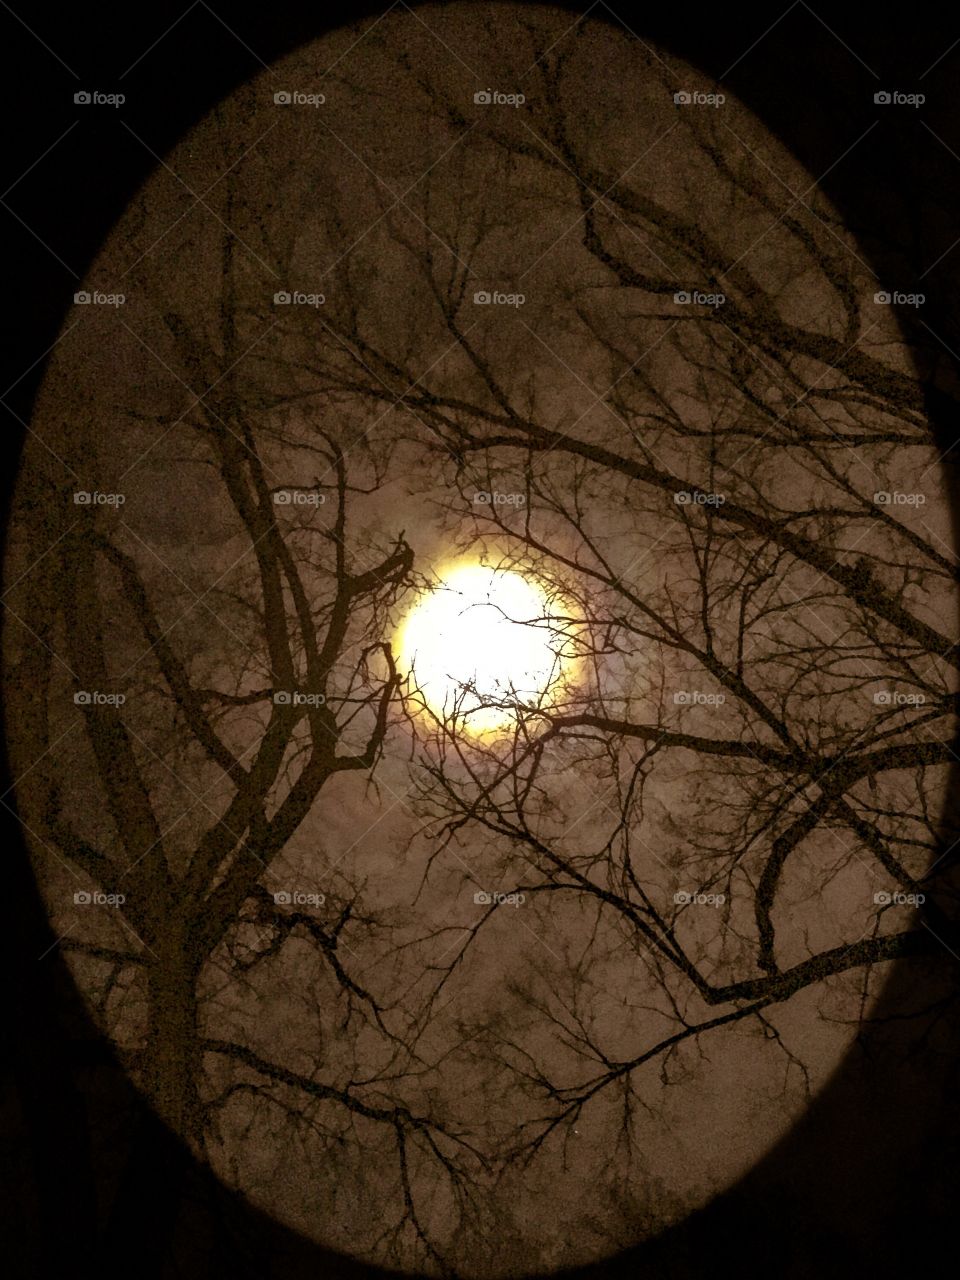 Parked next to a tree while at work, looked up and BOOM the moon was full an bright!!!